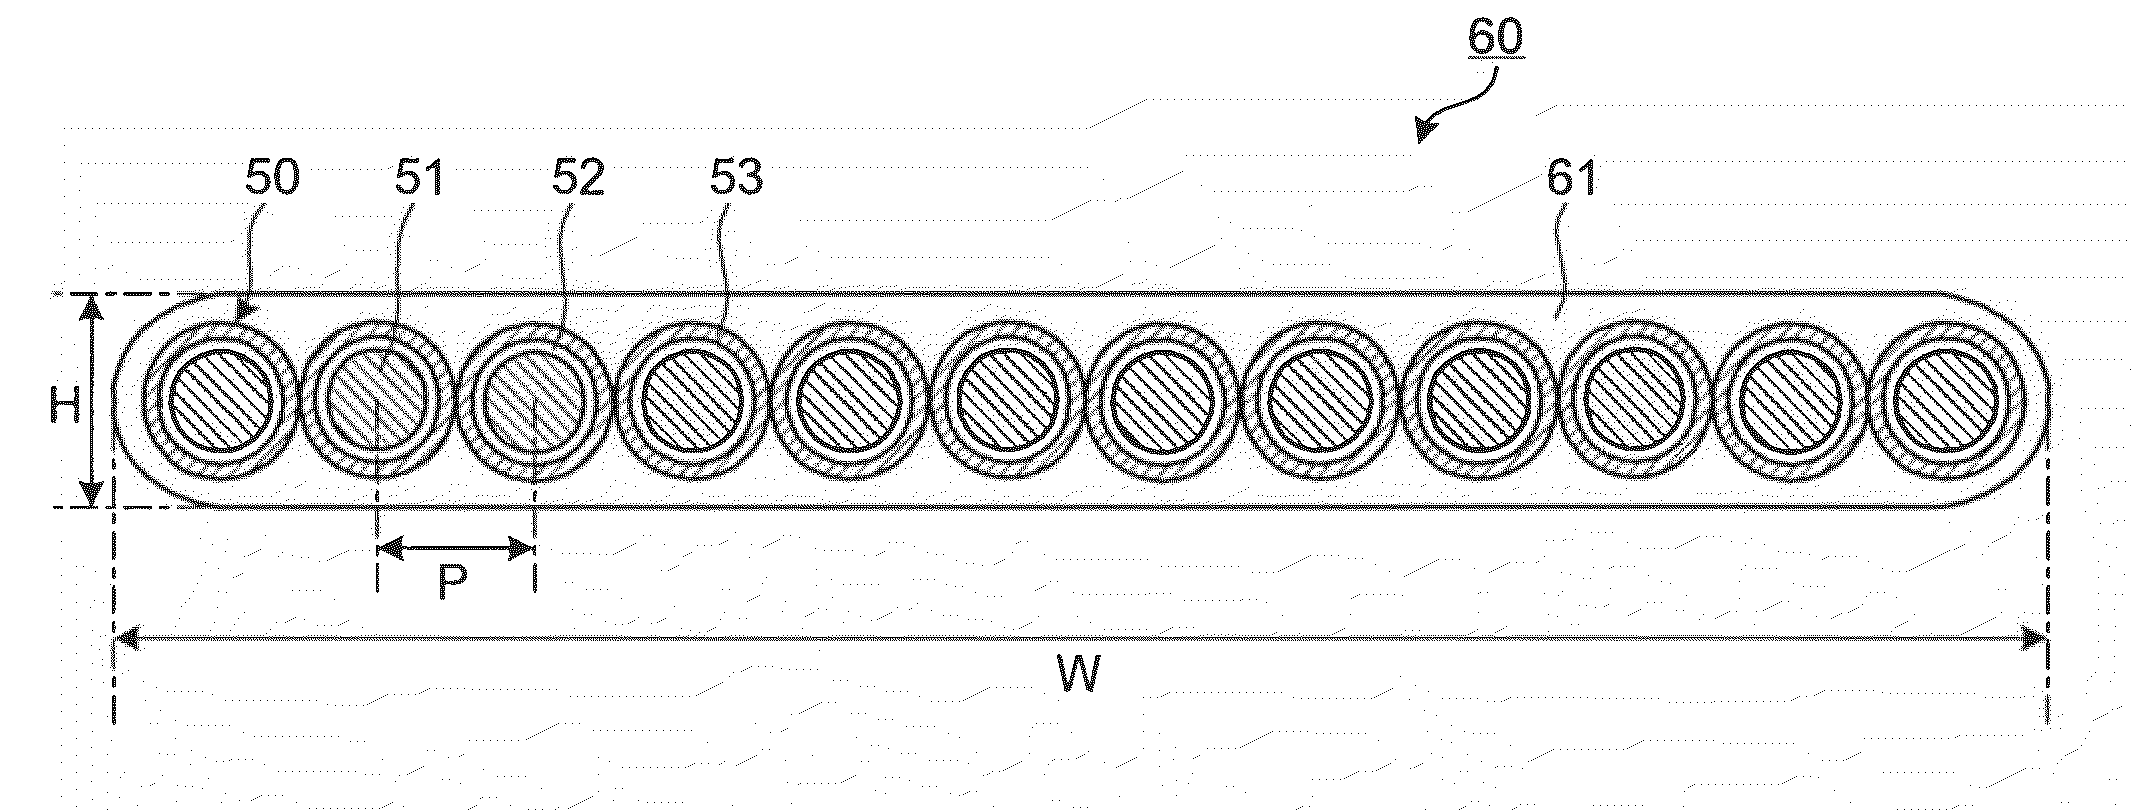 Optical fiber and optical fiber ribbon, and optical interconnection system